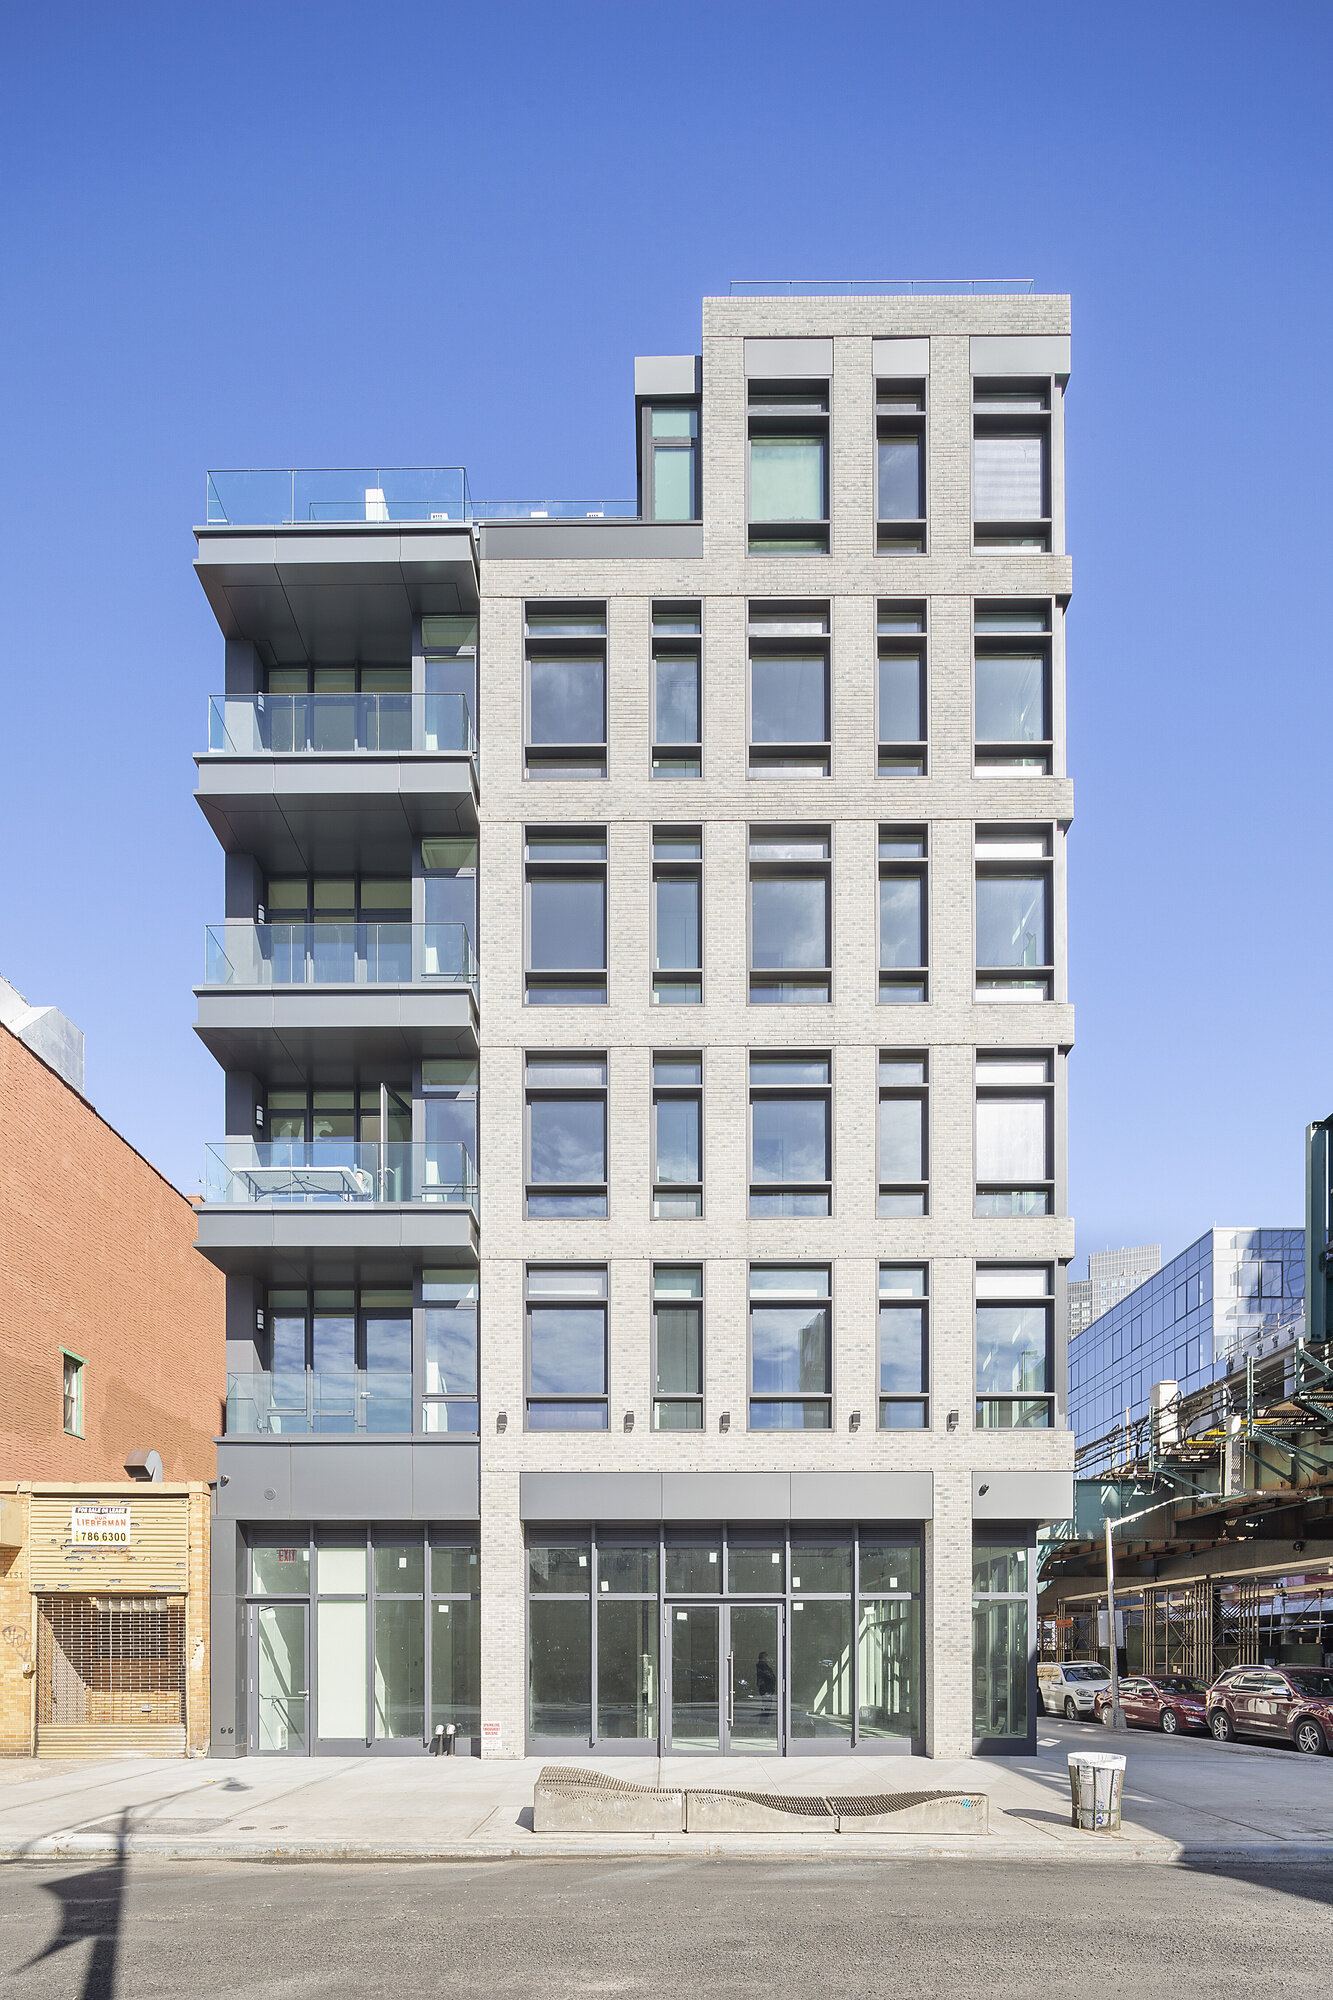   The Ivan Mijalkovic Team  at The Corcoran Group is pleased to announce that ATHA, a boutique luxury rental located 21-59 44th Drive in Long Island City, Queens, is now fully leased. Developed by Athienou Properties   LLC   and designed by  Z Archit